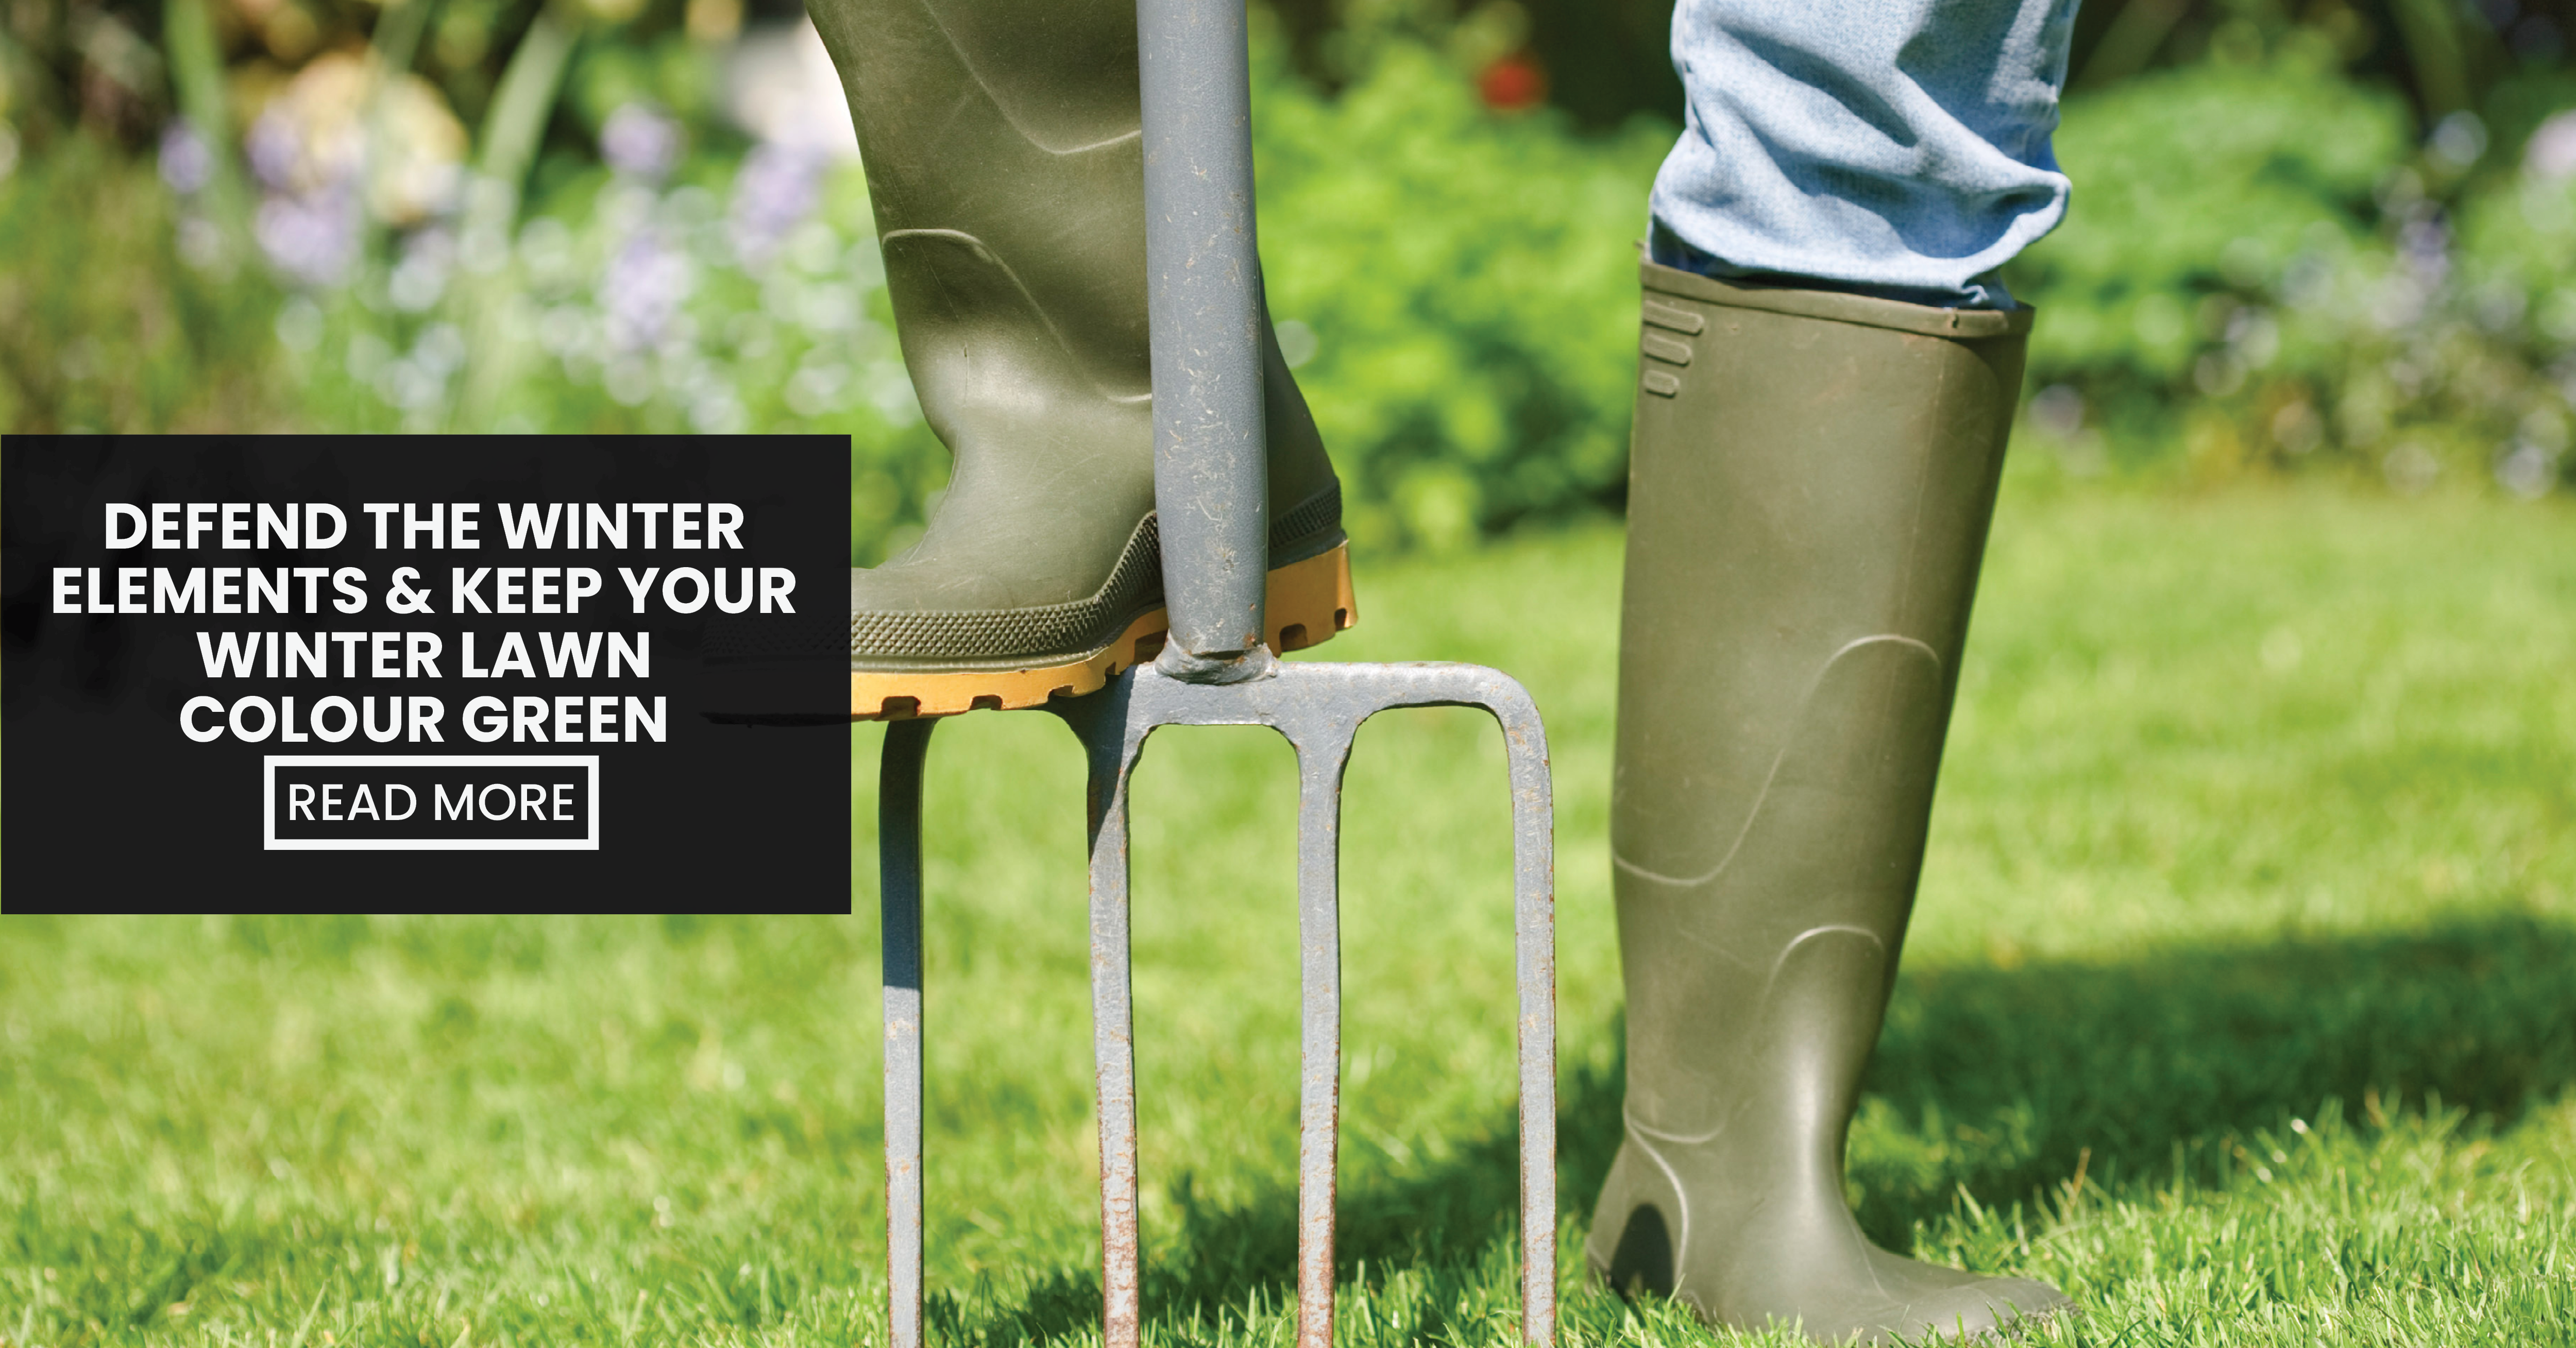 Defend The Winter Elements & Keep Your Winter Lawn Colour Green